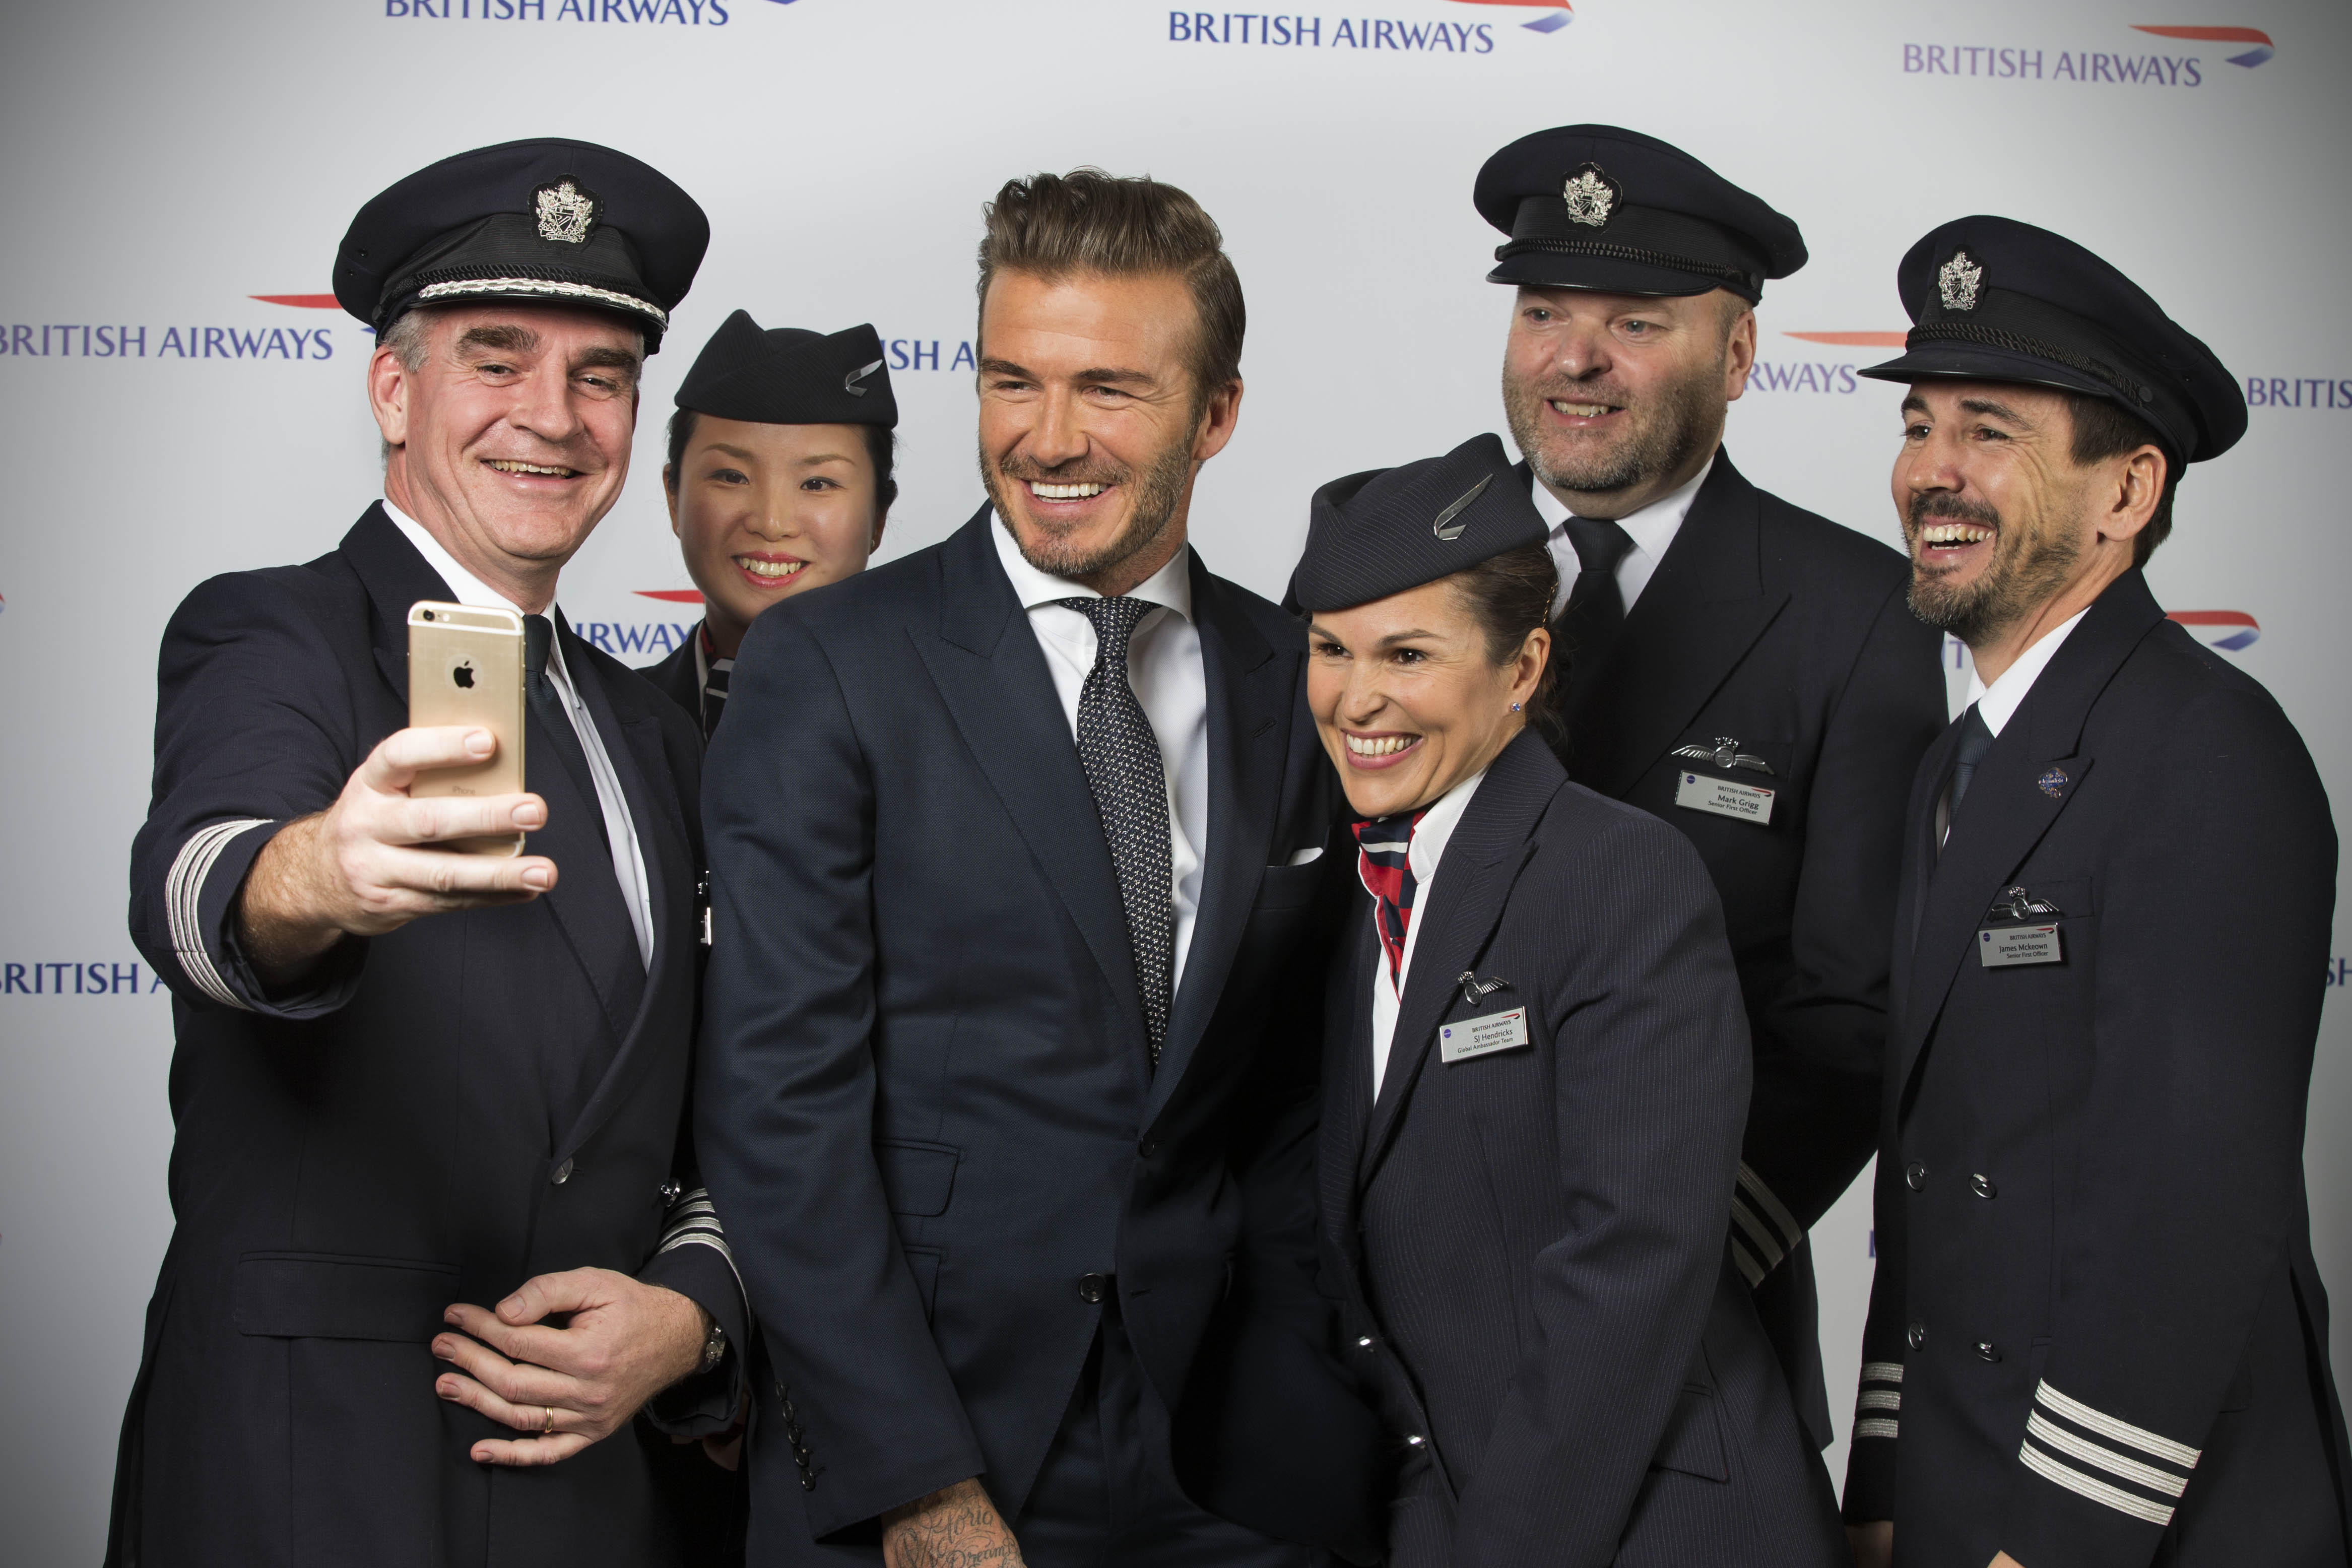 David Beckham poses for a selfie with Briitsh Airways pilots and cabin crew (c) Wouter Kingma